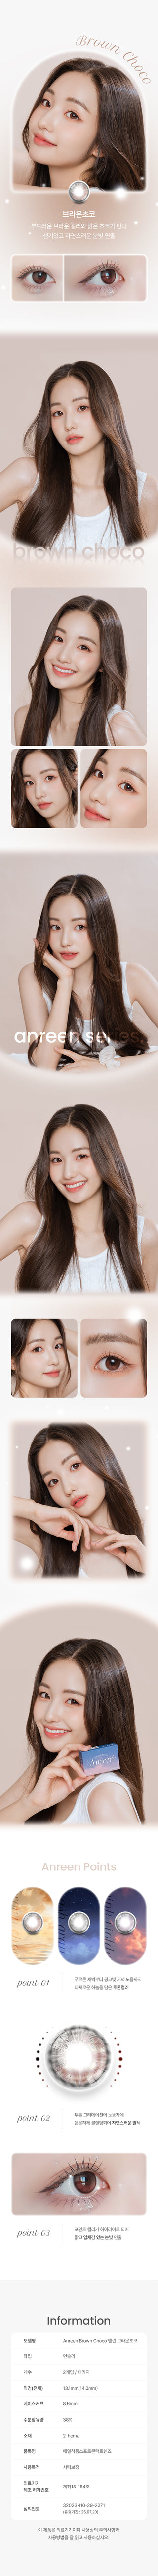 A close-up of a model demonstrating a natural makeup look with Ann365 Anreen Brown Choco circle colour contacts, highlighting how well the contact lenses blend with her dark eyes.